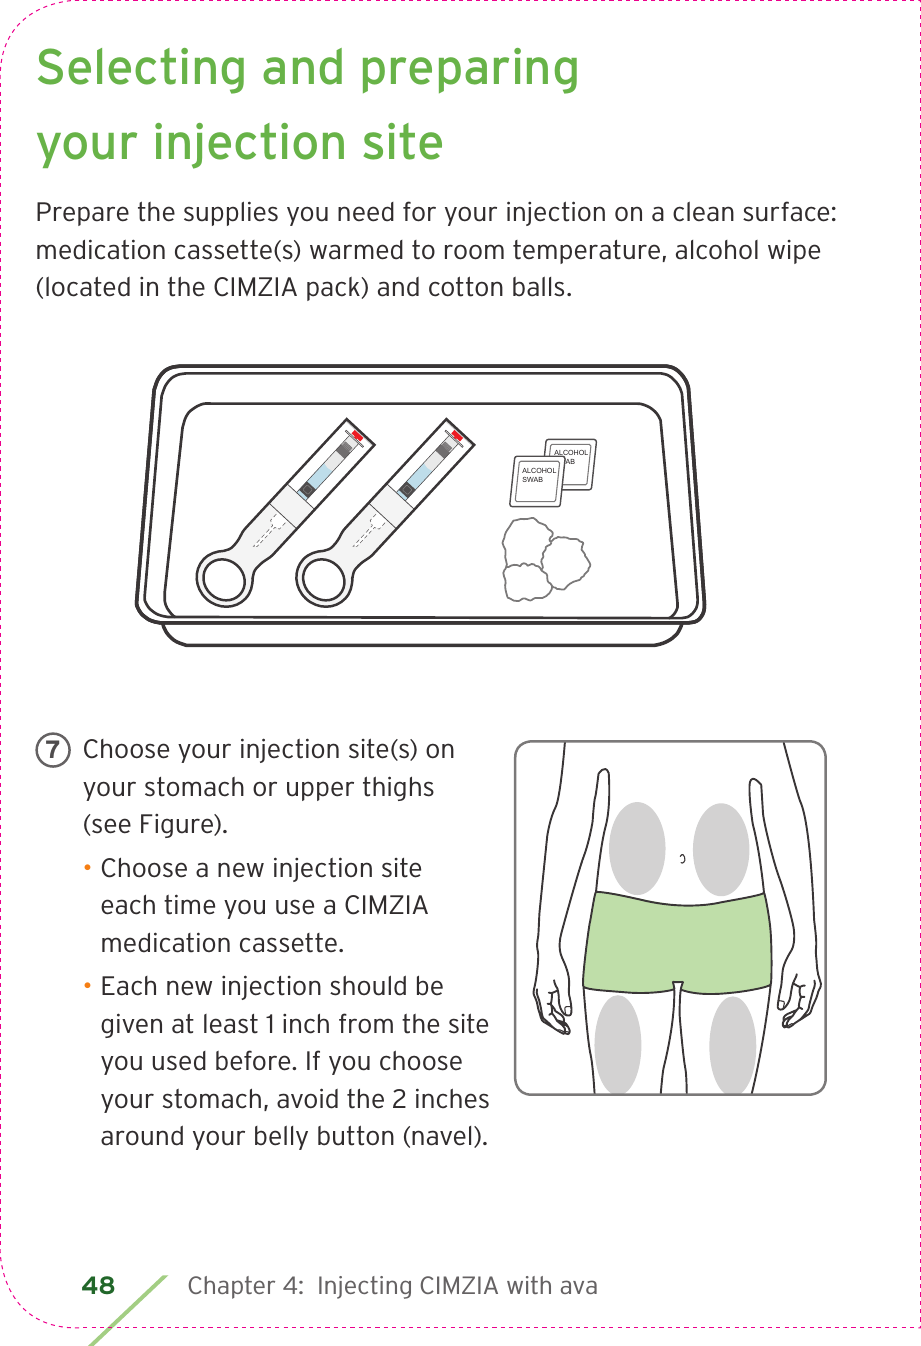 48 Chapter 4:  Injecting CIMZIA with avaSelecting and preparing your injection sitePrepare the supplies you need for your injection on a clean surface: medication cassette(s) warmed to room temperature, alcohol wipe (located in the CIMZIA pack) and cotton balls.Choose your injection site(s) on your stomach or upper thighs (see Figure).• Choose a new injection site each time you use a CIMZIA medication cassette.• Each new injection should be given at least 1 inch from the site you used before. If you choose your stomach, avoid the 2 inches around your belly button (navel).7ALCOHOLSWABALCOHOLSWAB